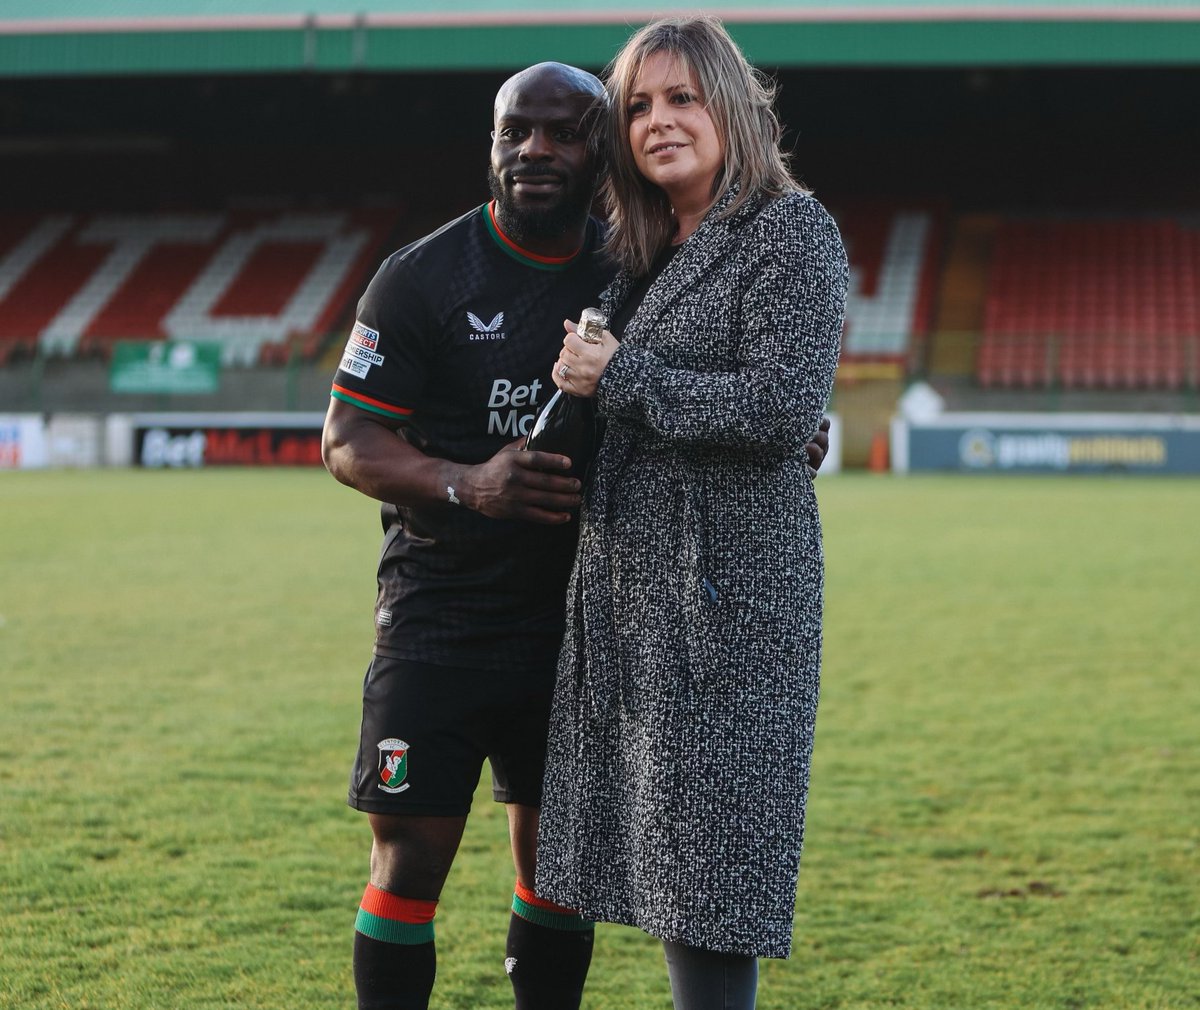 𝗠𝗔𝗡 𝗢𝗙 𝗧𝗛𝗘 𝗠𝗔𝗧𝗖𝗛 🥁 Today's Man Of The Match sponsored by That Prize Guy... Fuad Sule!! Well done Fudzer!